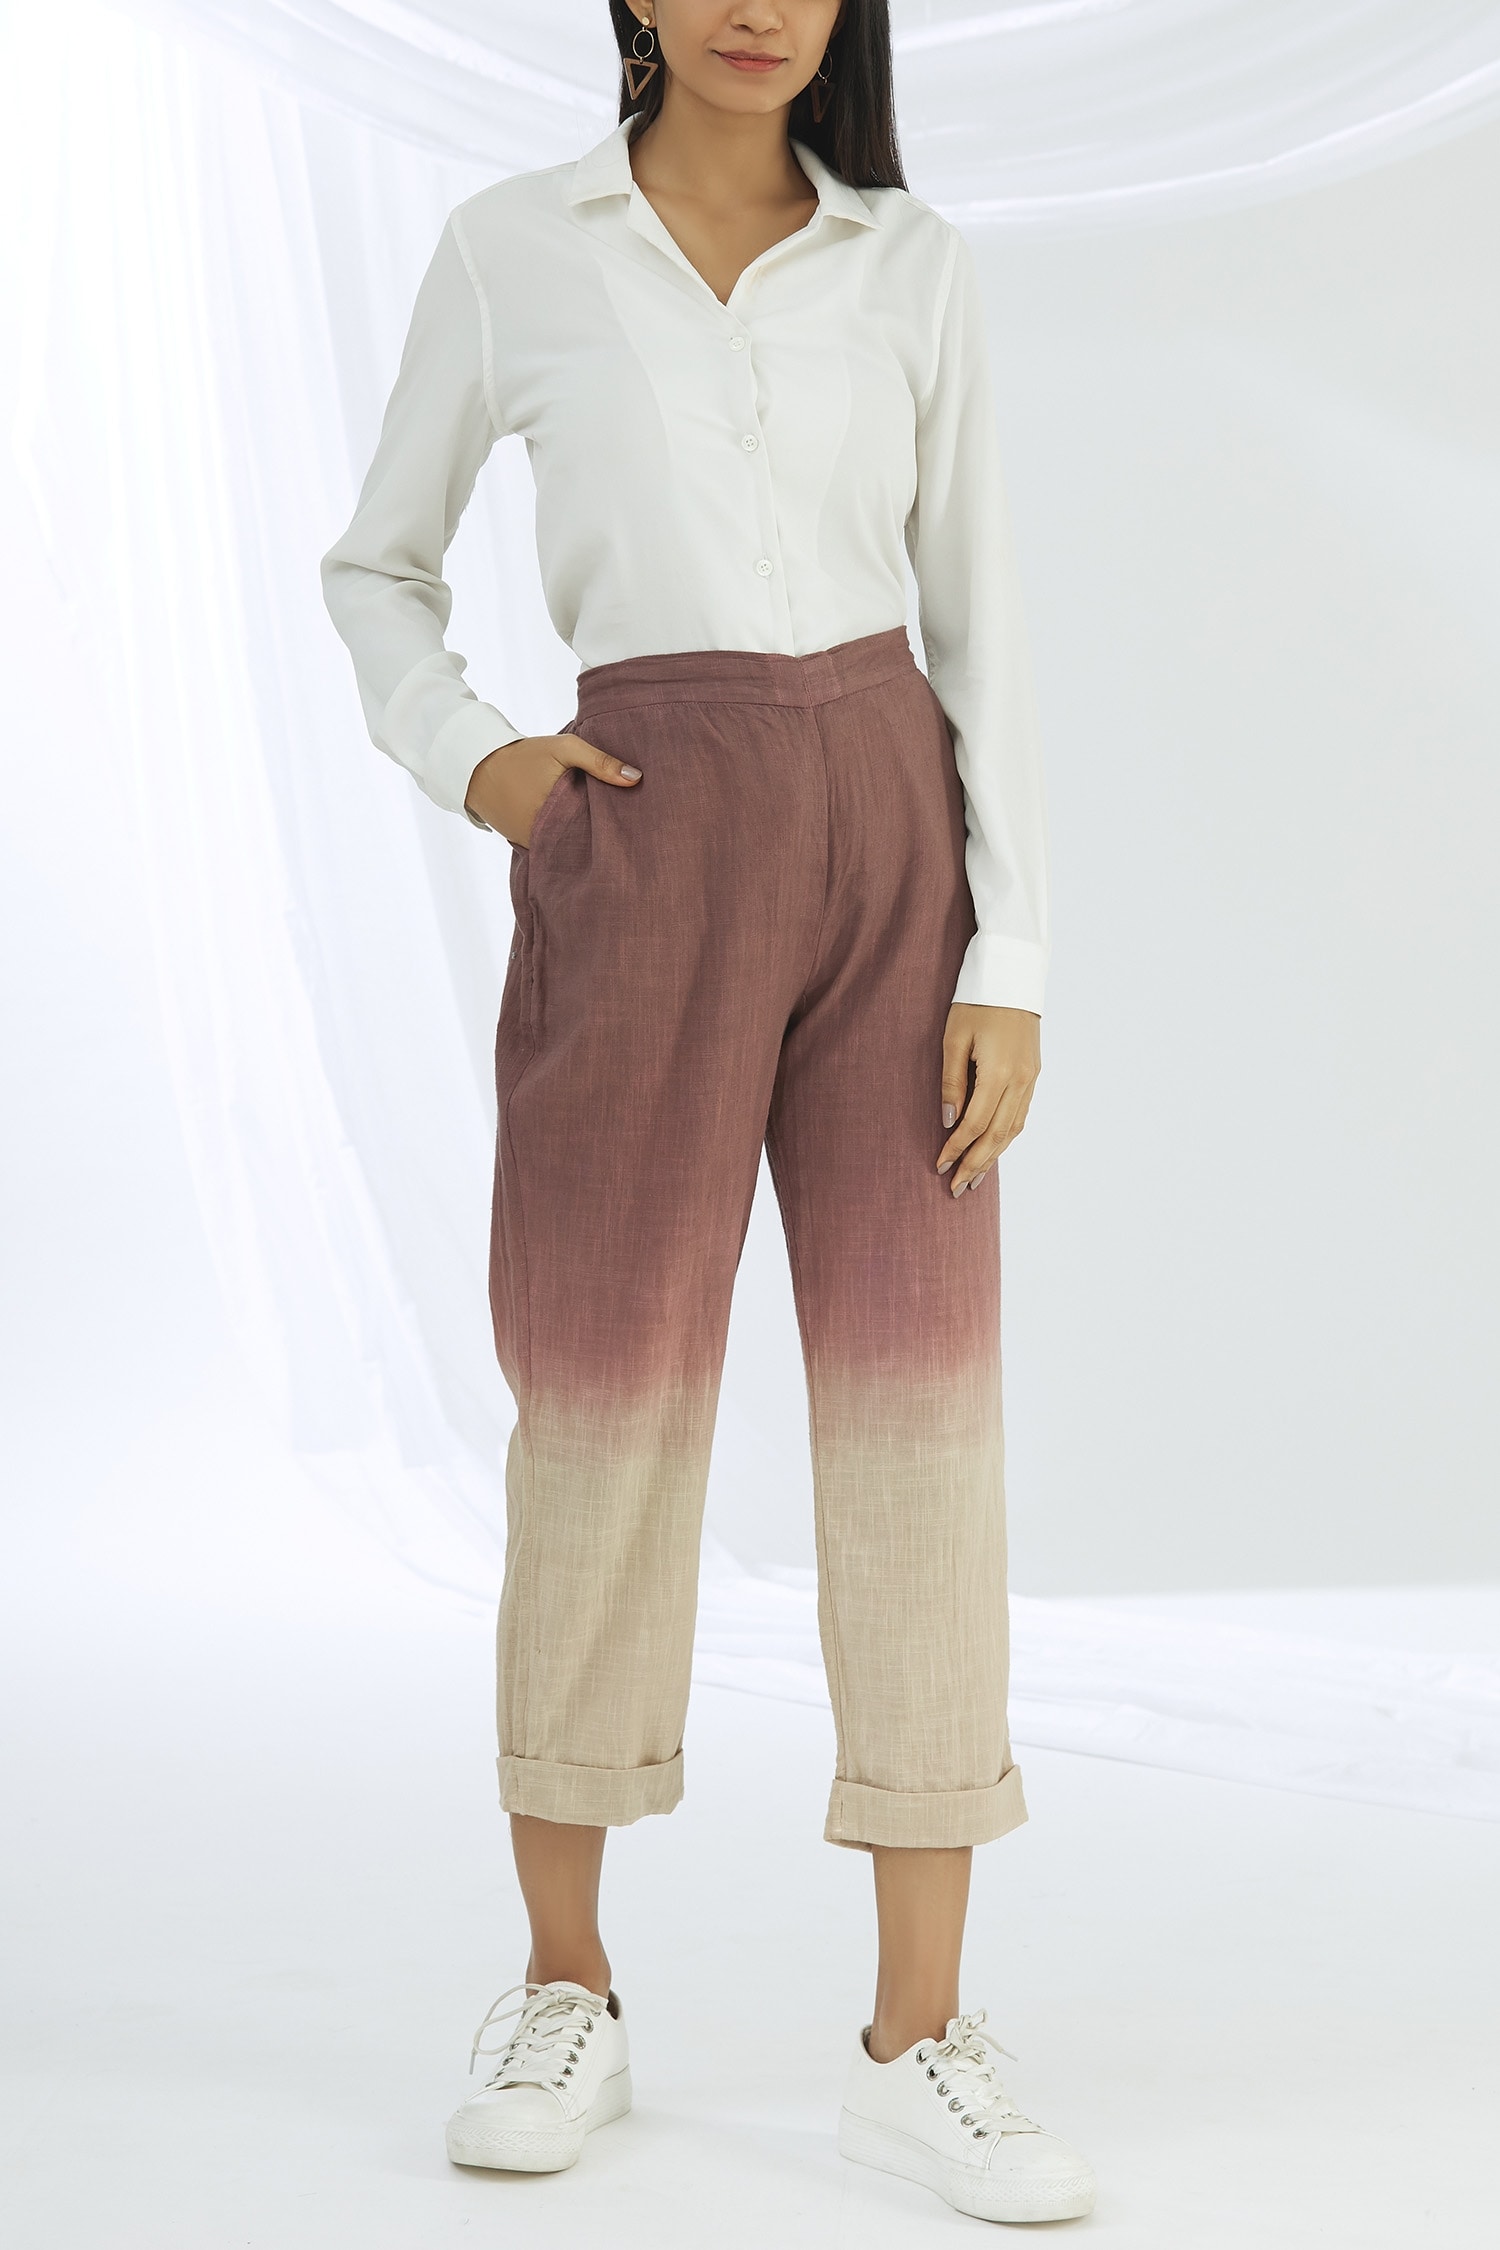 Buy CELIO Brown Solid Linen Straight Fit Men's Trousers | Shoppers Stop